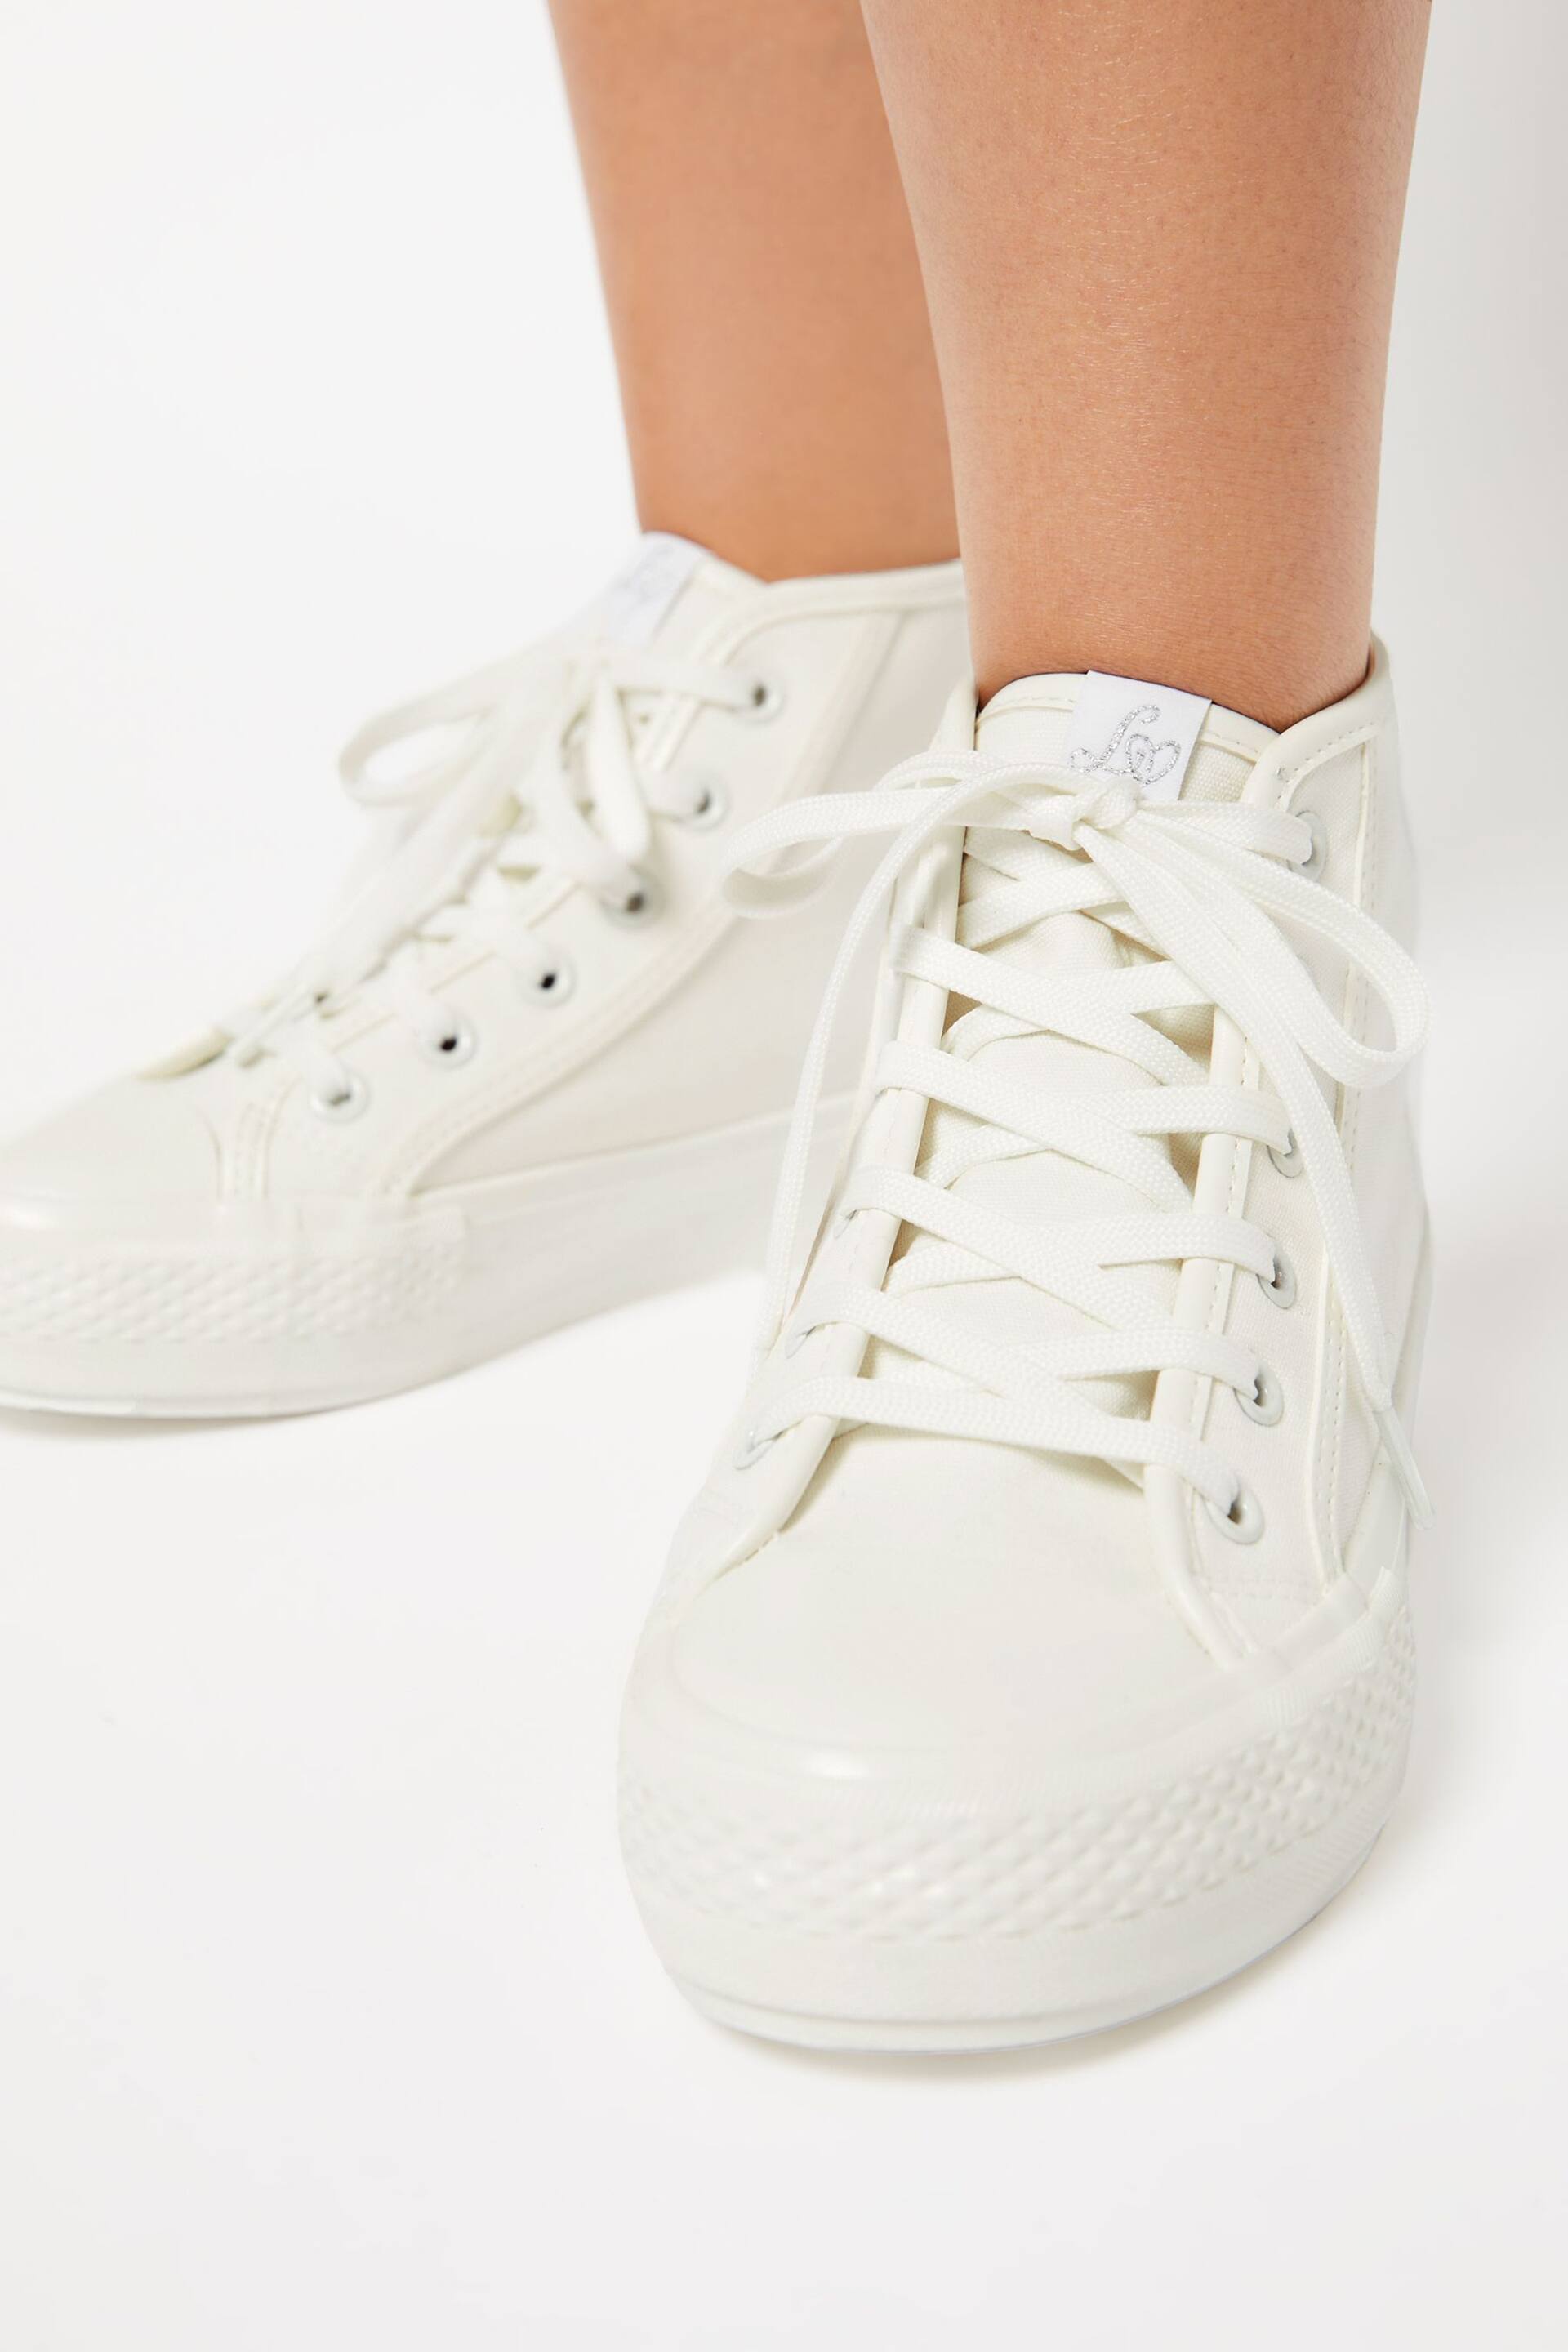 Lipsy Girl White High Top Flatform Lace Up Canvas Trainers - Image 2 of 4